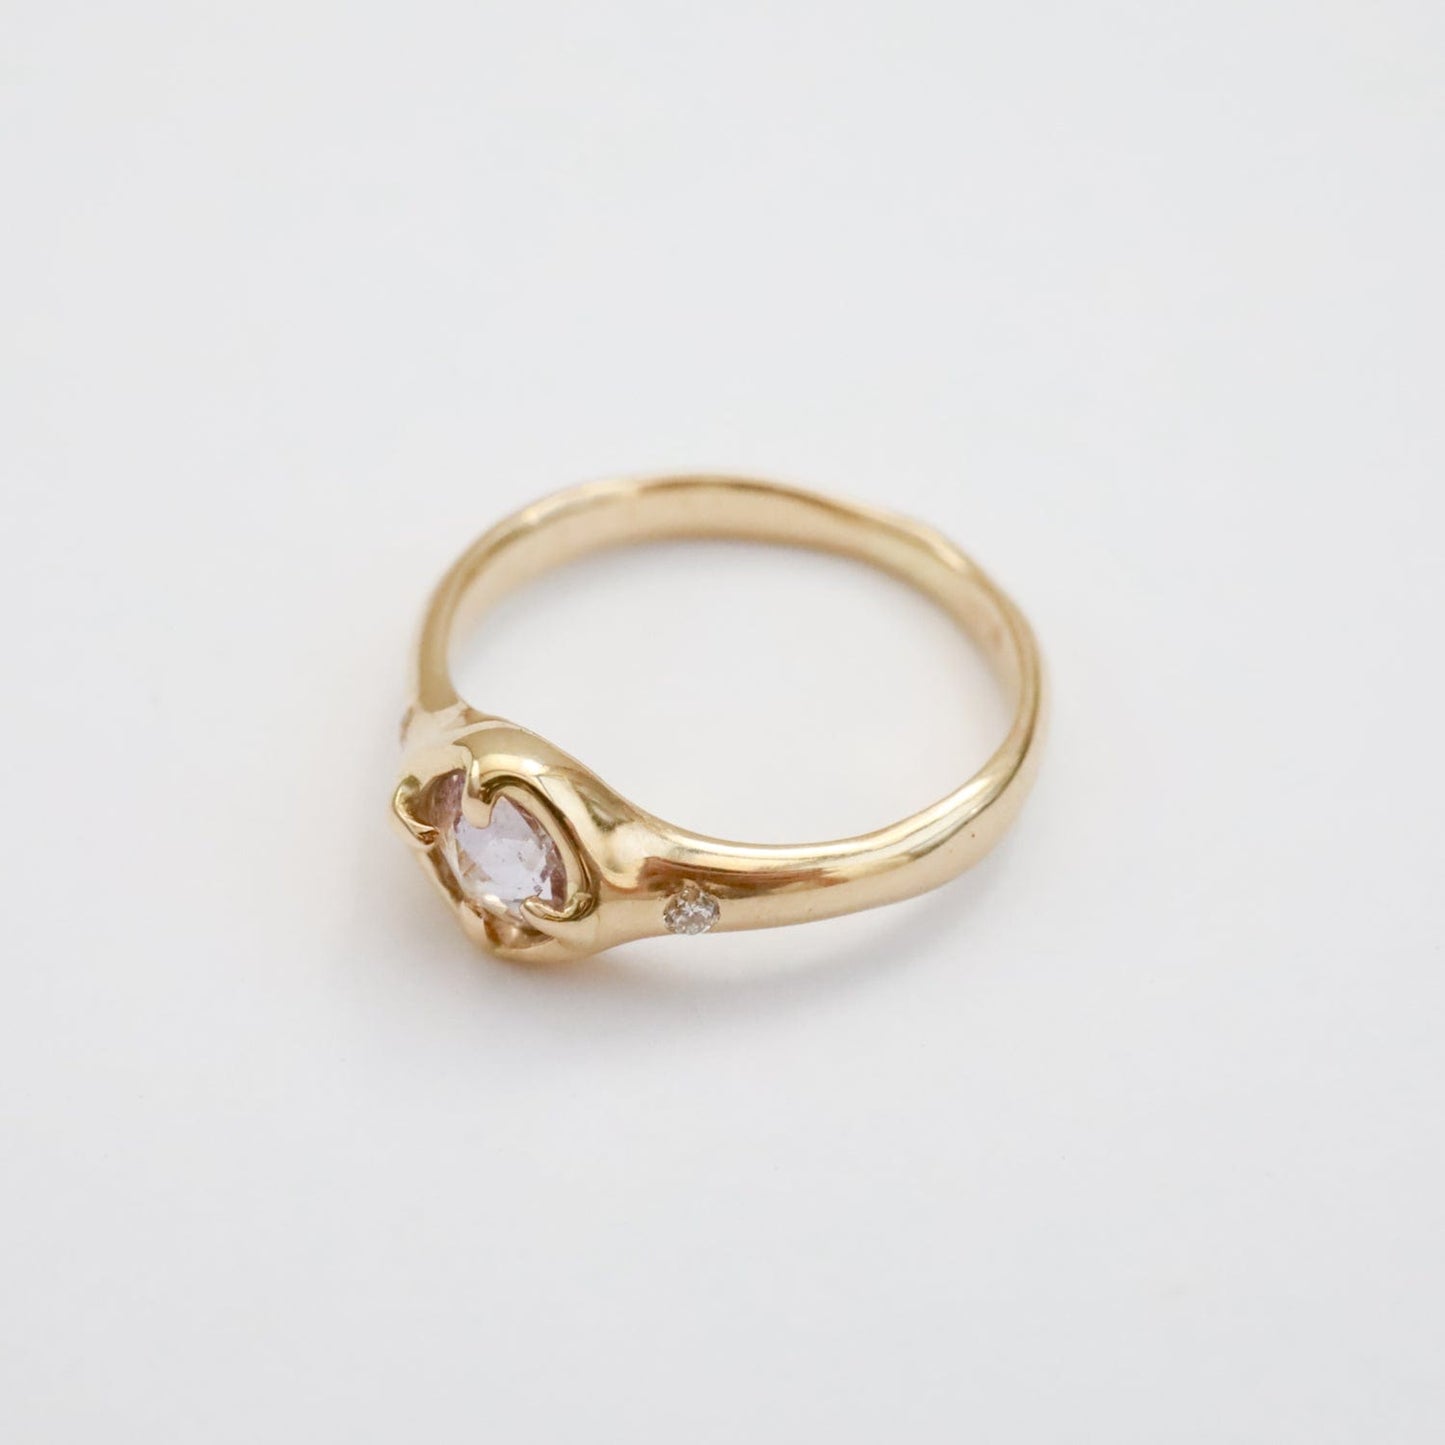 RNG-14K Gold Compass Rose Ring